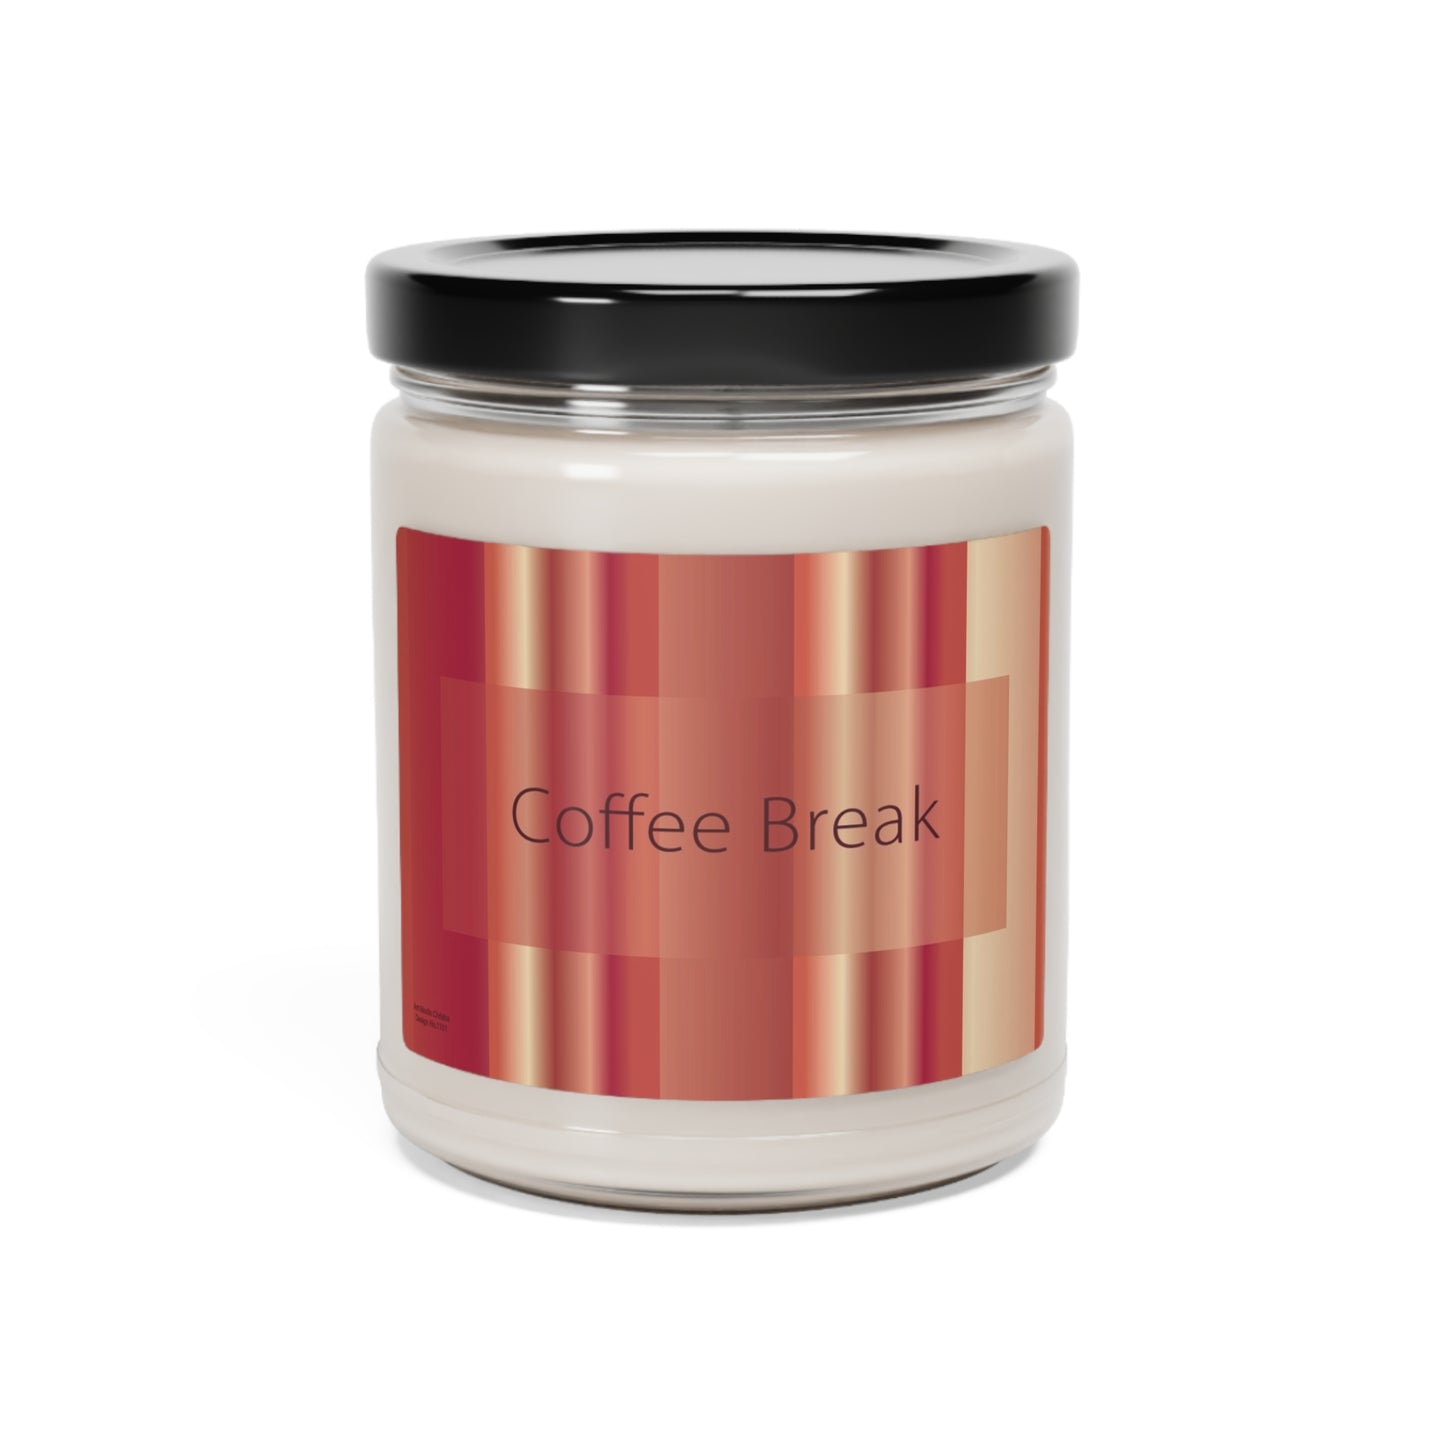 Scented Soy Candle, 9oz Coffee Break - Design No.1101